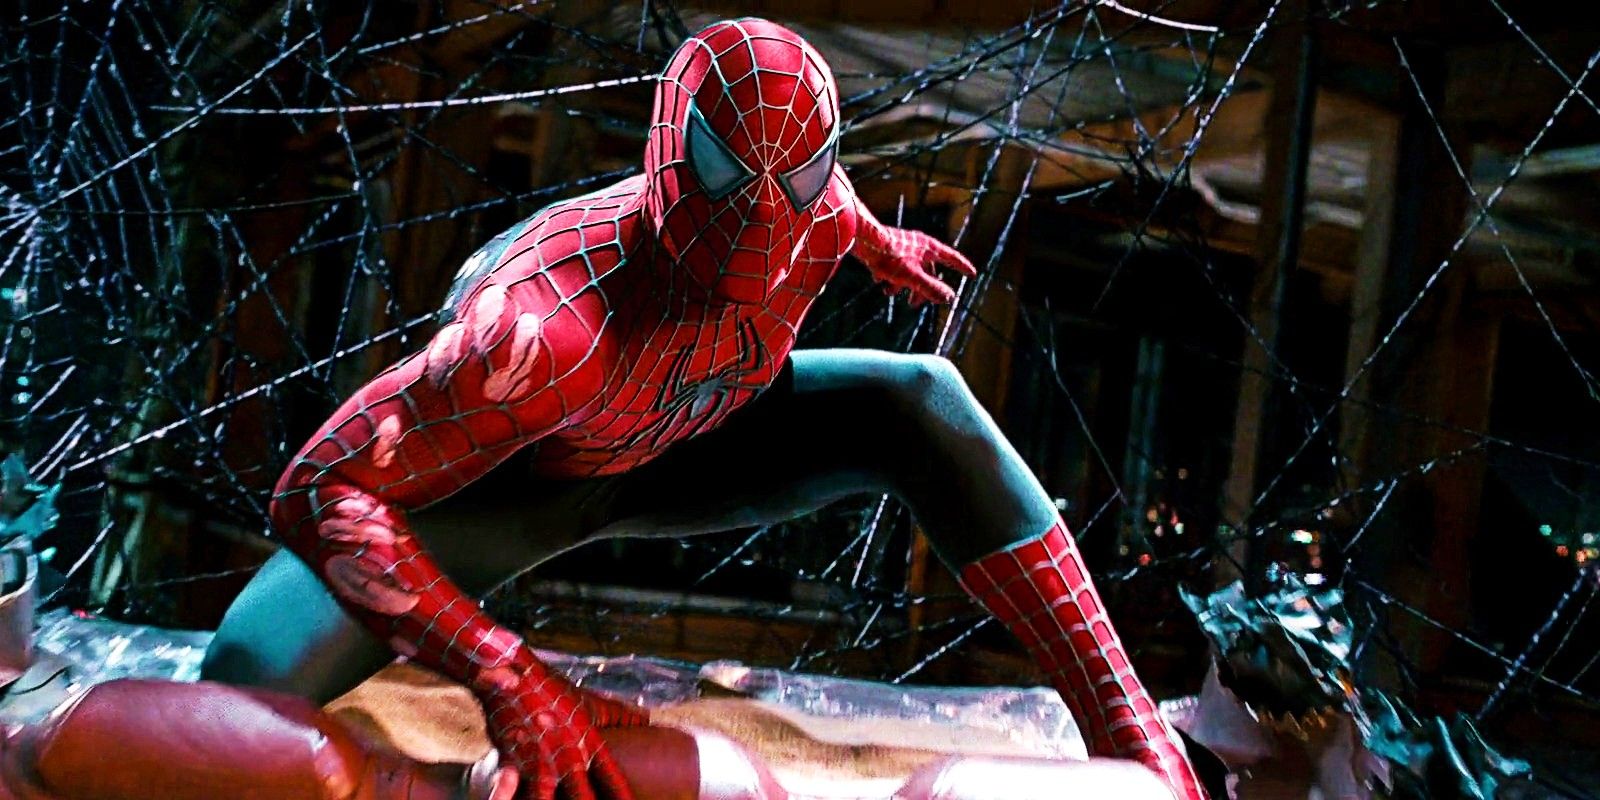 Iconic Tobey Maguire Spider-Man 2 Scene Recreated In Wonderfully Bizarre Thomas The Tank Engine Crossover